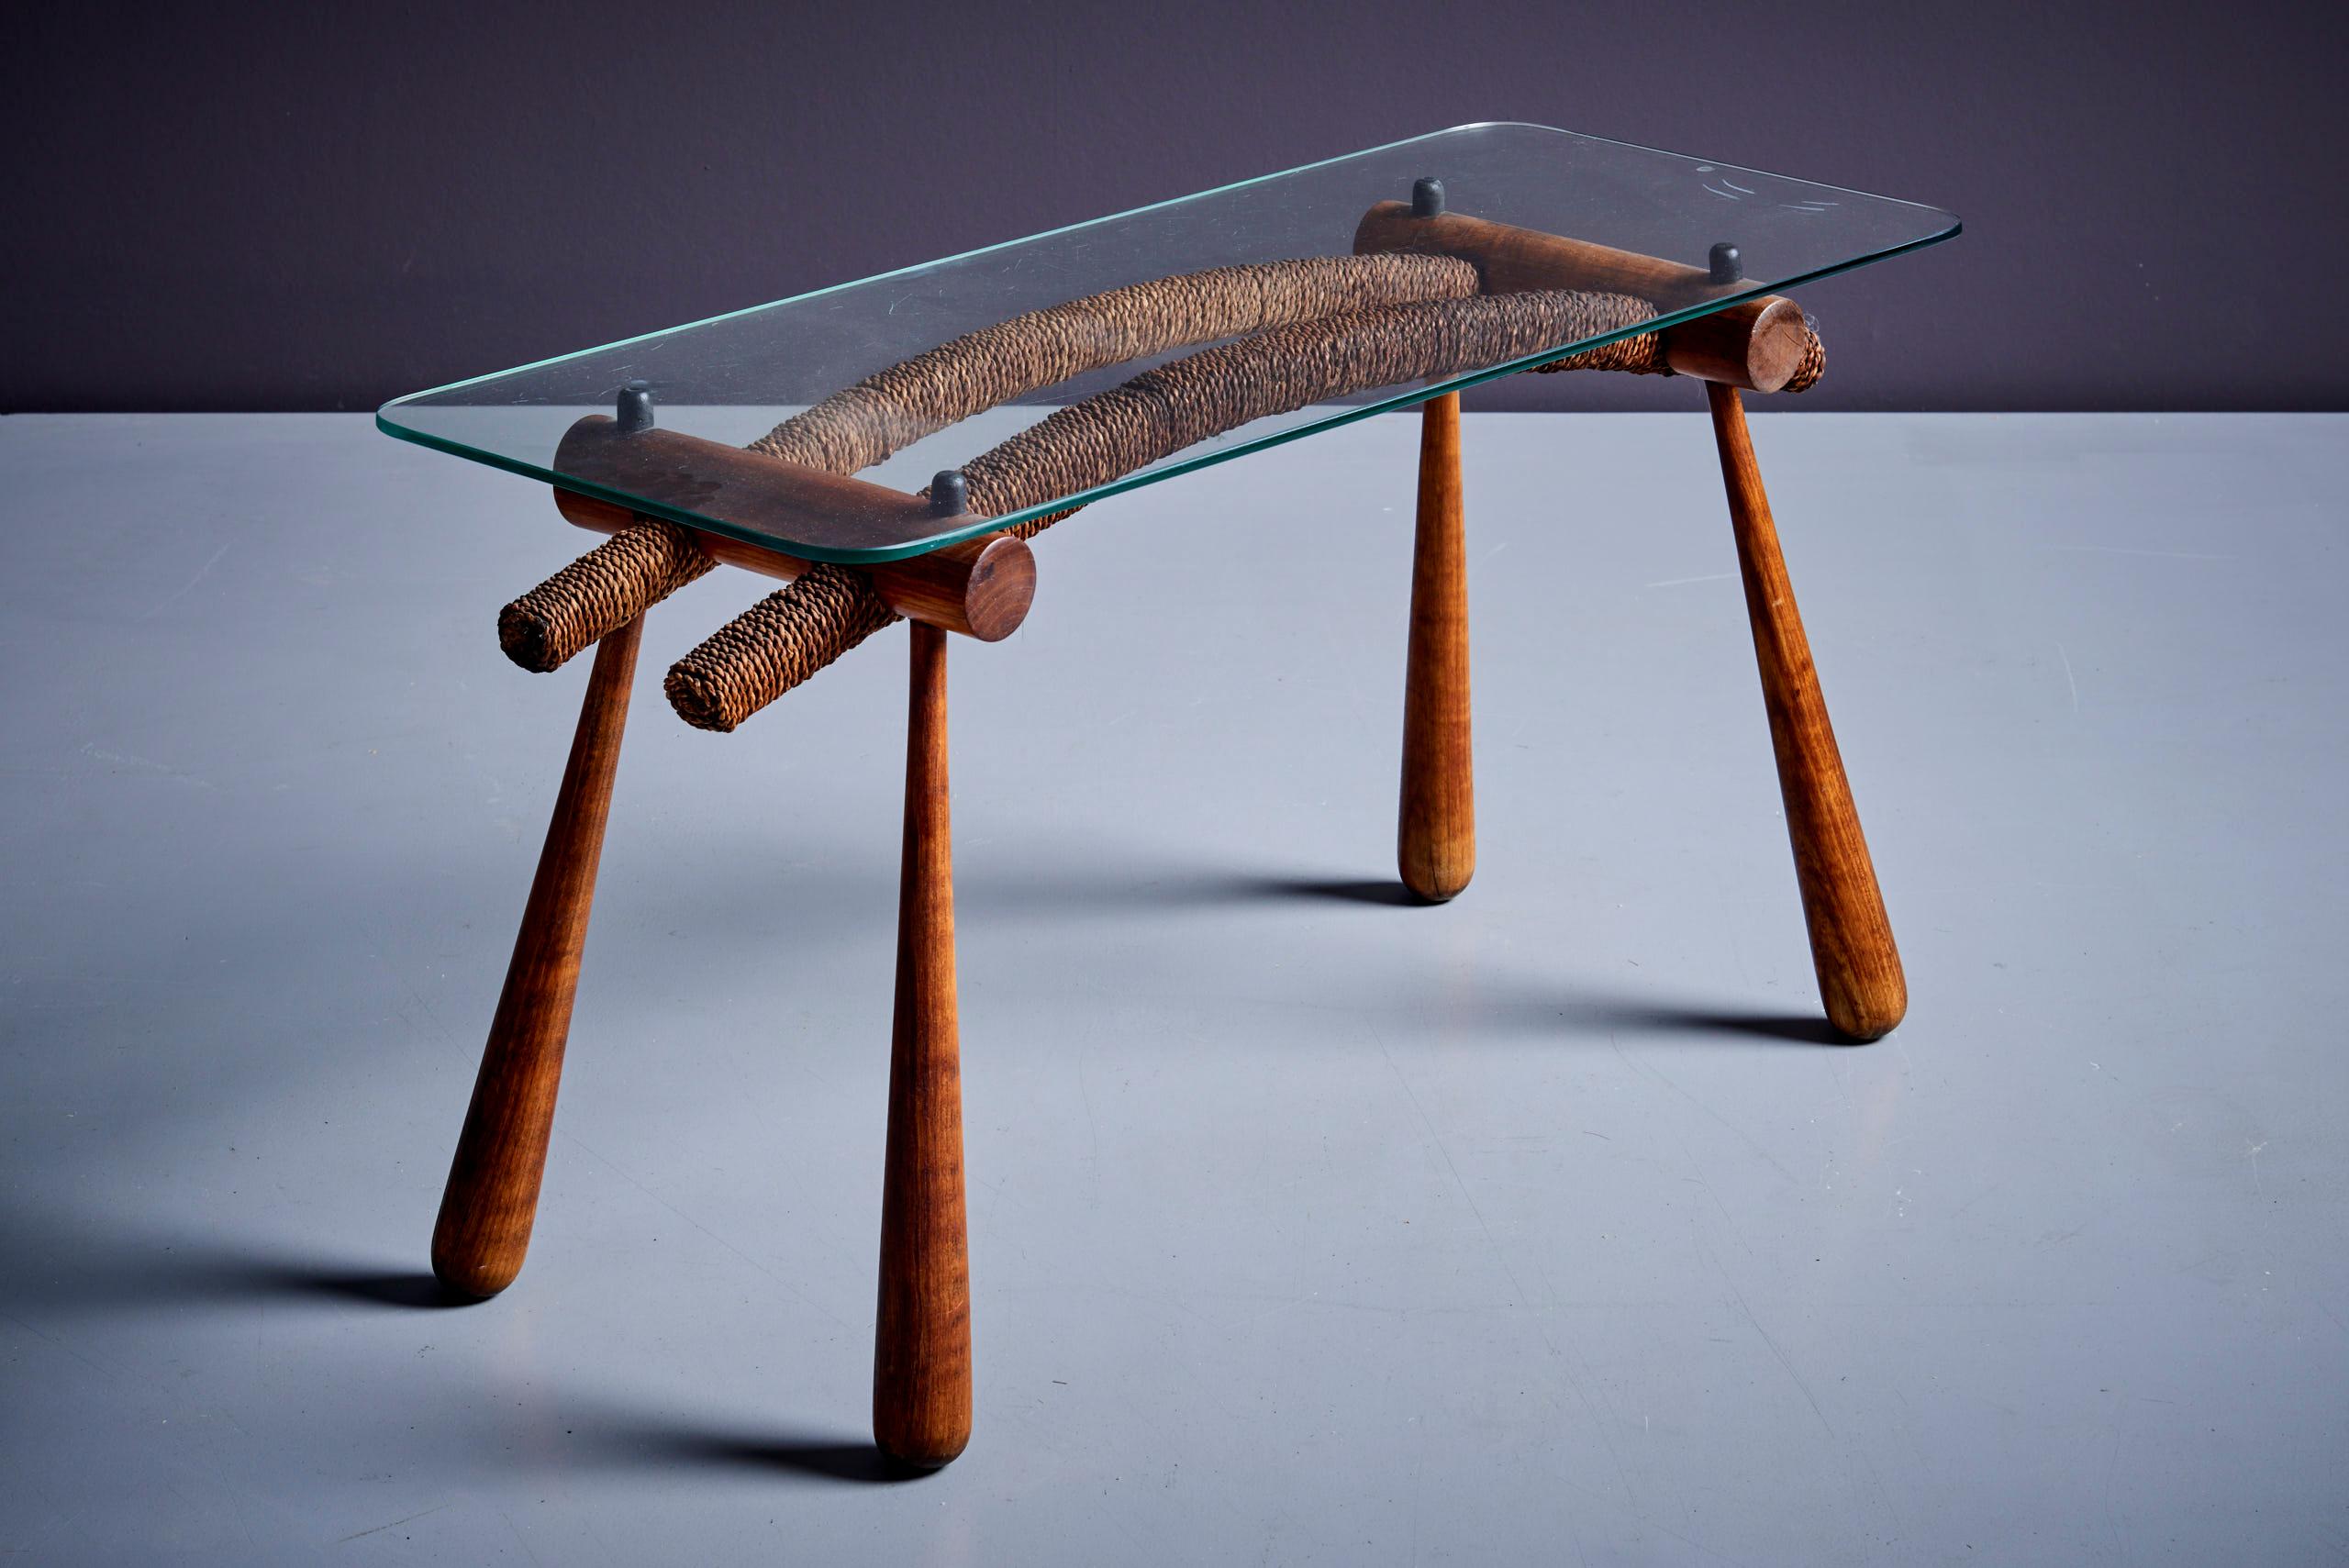 This coffee table is designed by the architect Max Kment and executed by 